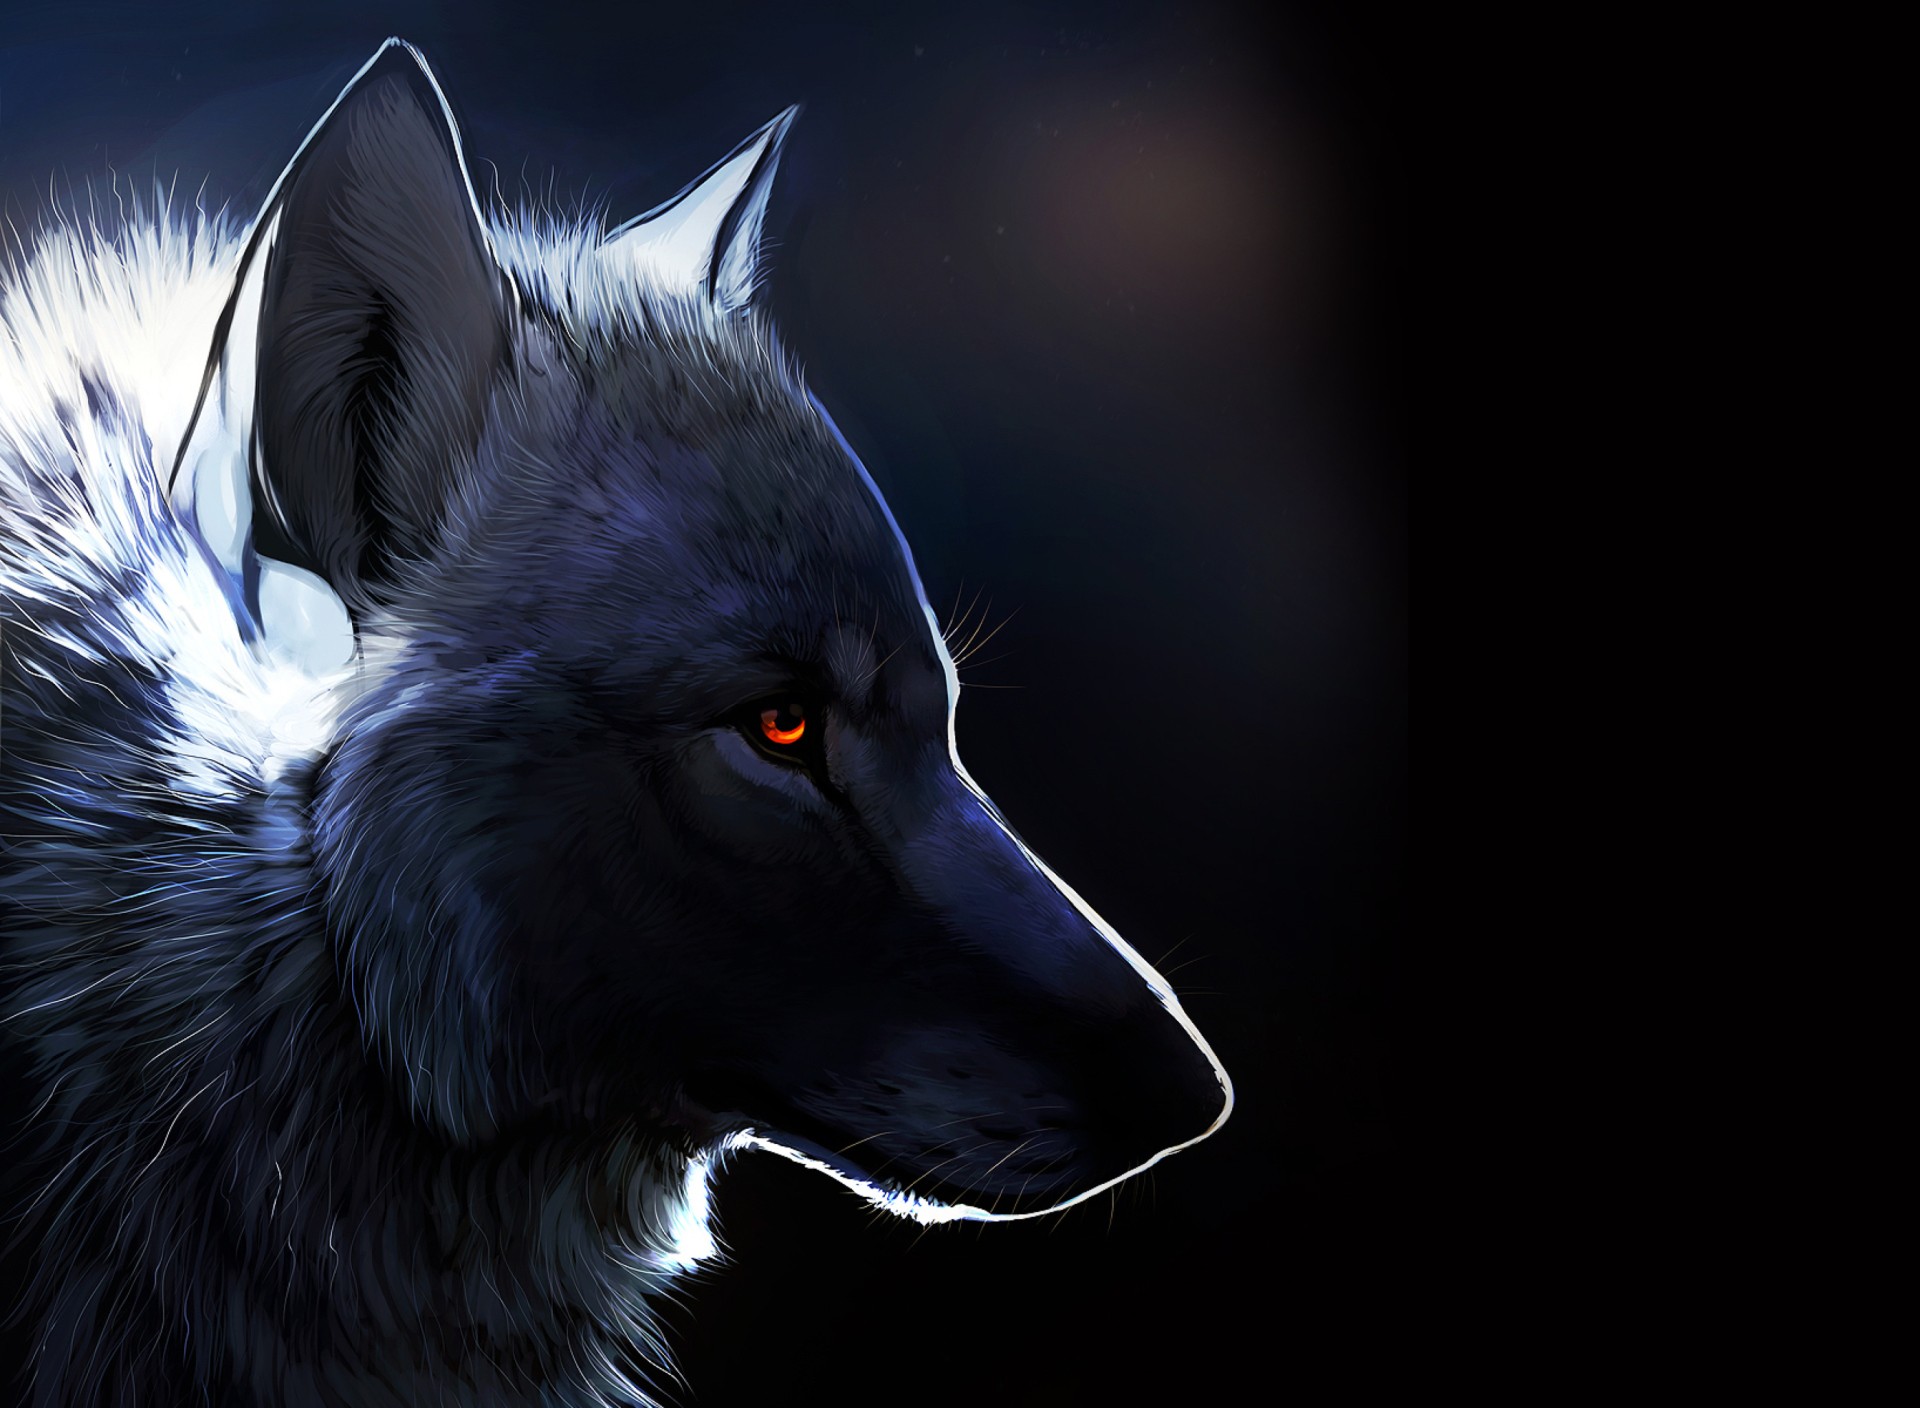 Wolf With Amber Eyes Painting screenshot #1 1920x1408